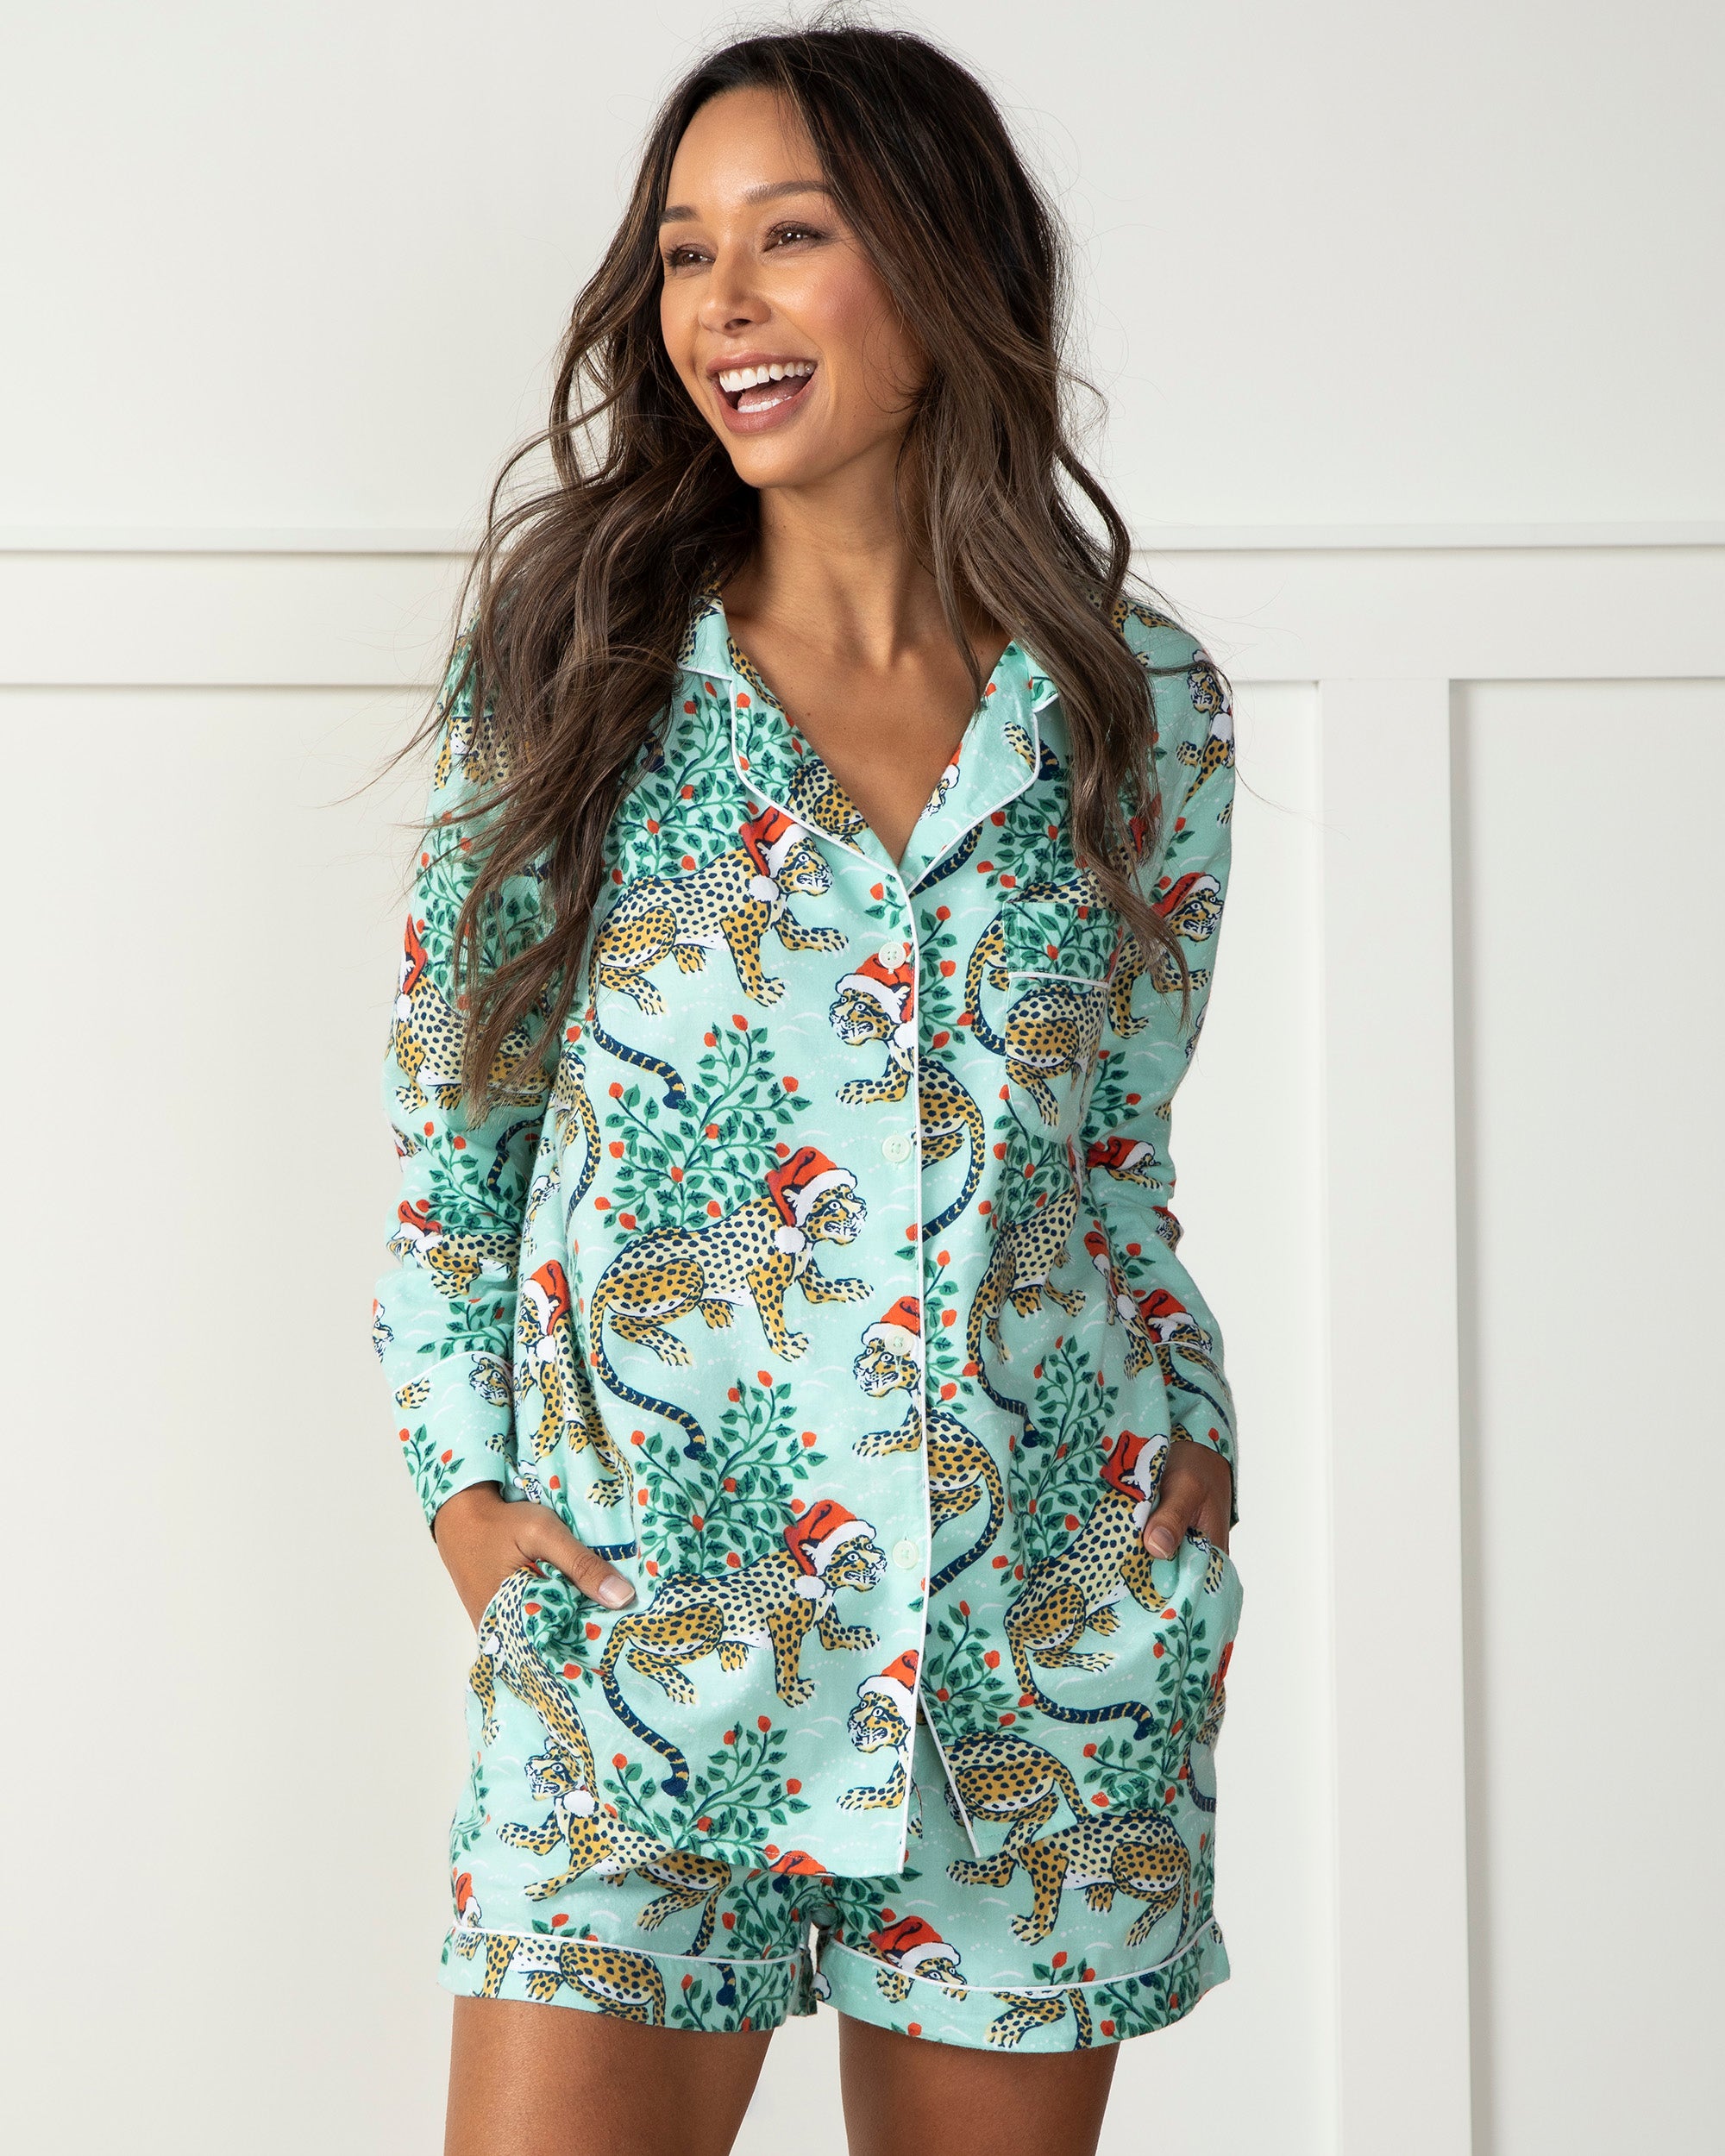 Holly Jolly Bagheera - Flannel Long Sleeve Top & Shorts Set - Frosted Mint - Printfresh